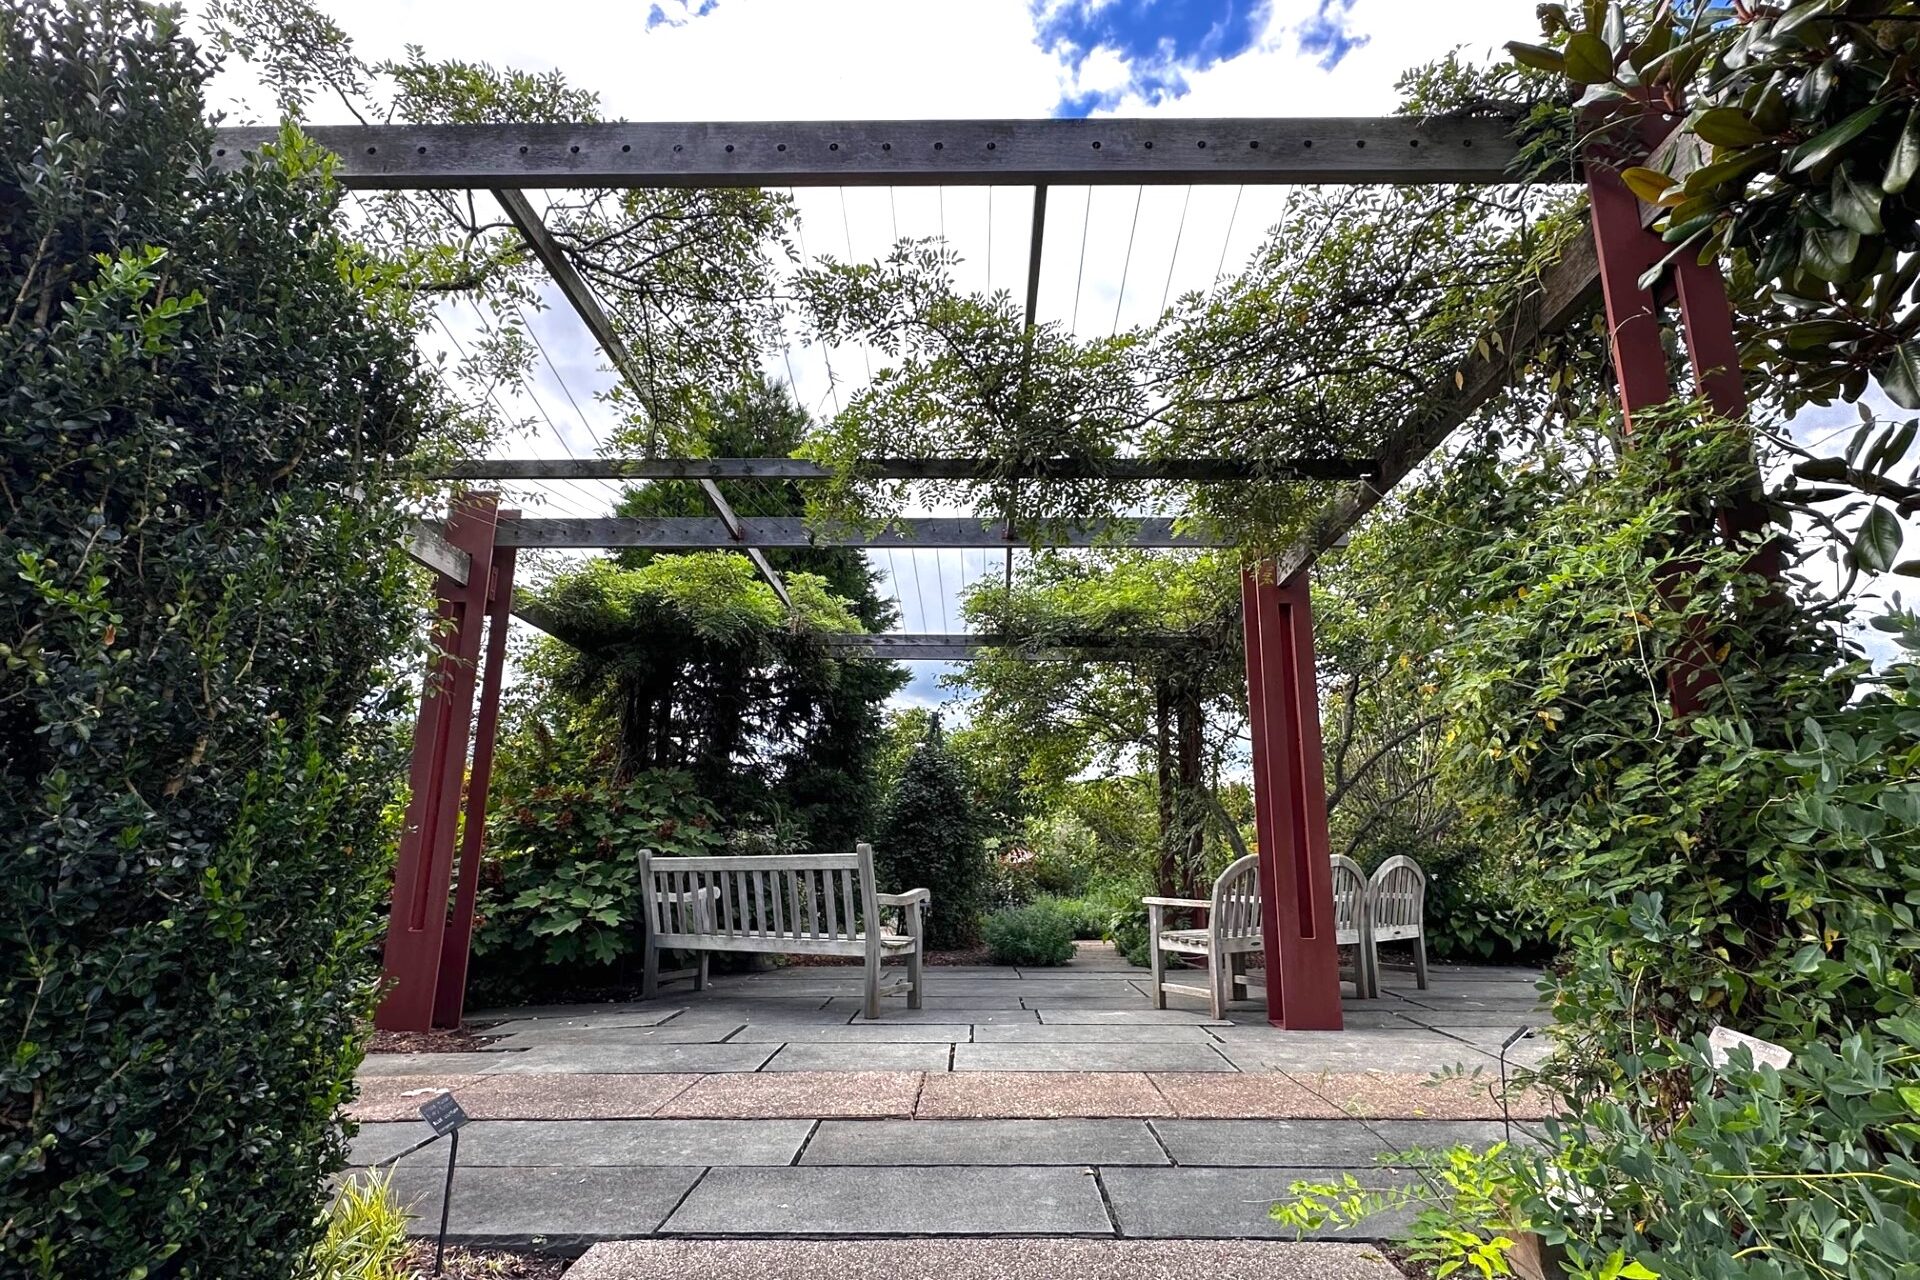 Rose Garden with a trellis above some aging benches